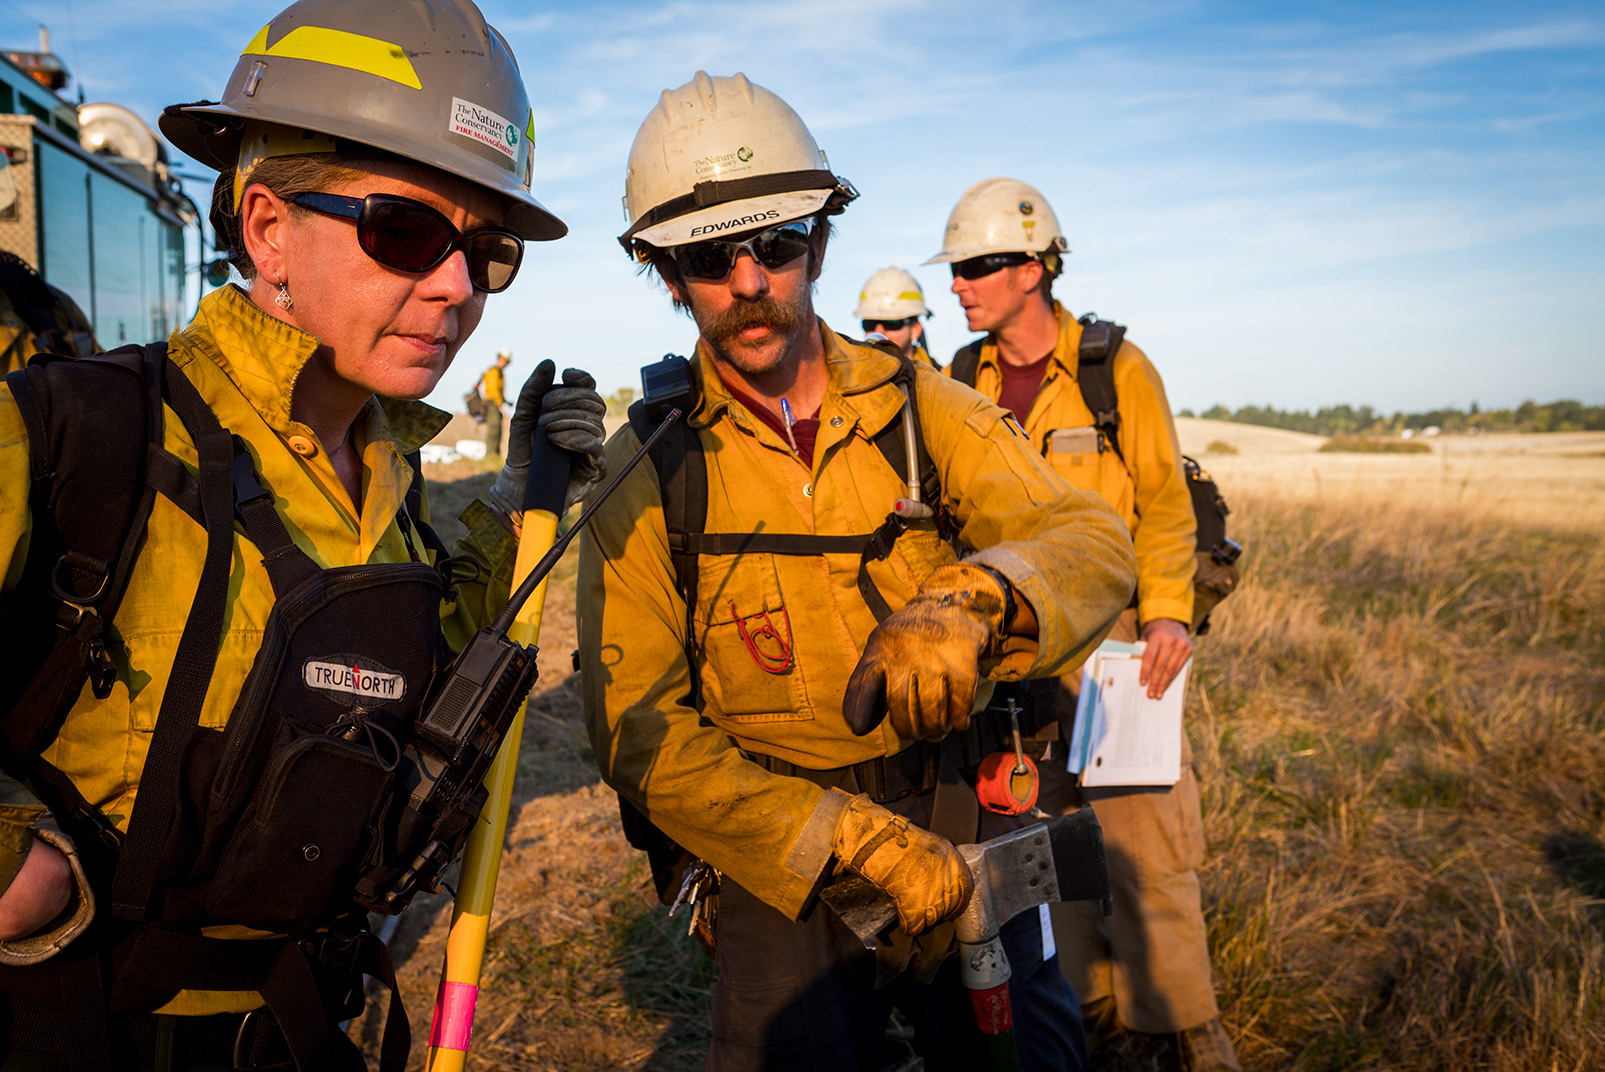 Photographer Jason Houston became a member of the team, getting to know people like Oregon Fire Manger Amanda Stamper (left) and Assistant Module Leader Tom Edwards. The team worked with local branches of groups like the U.S. Fish and Wildlife, the U.S. Forest Service and the Bureau of Land Management. Photo © Jason Houston